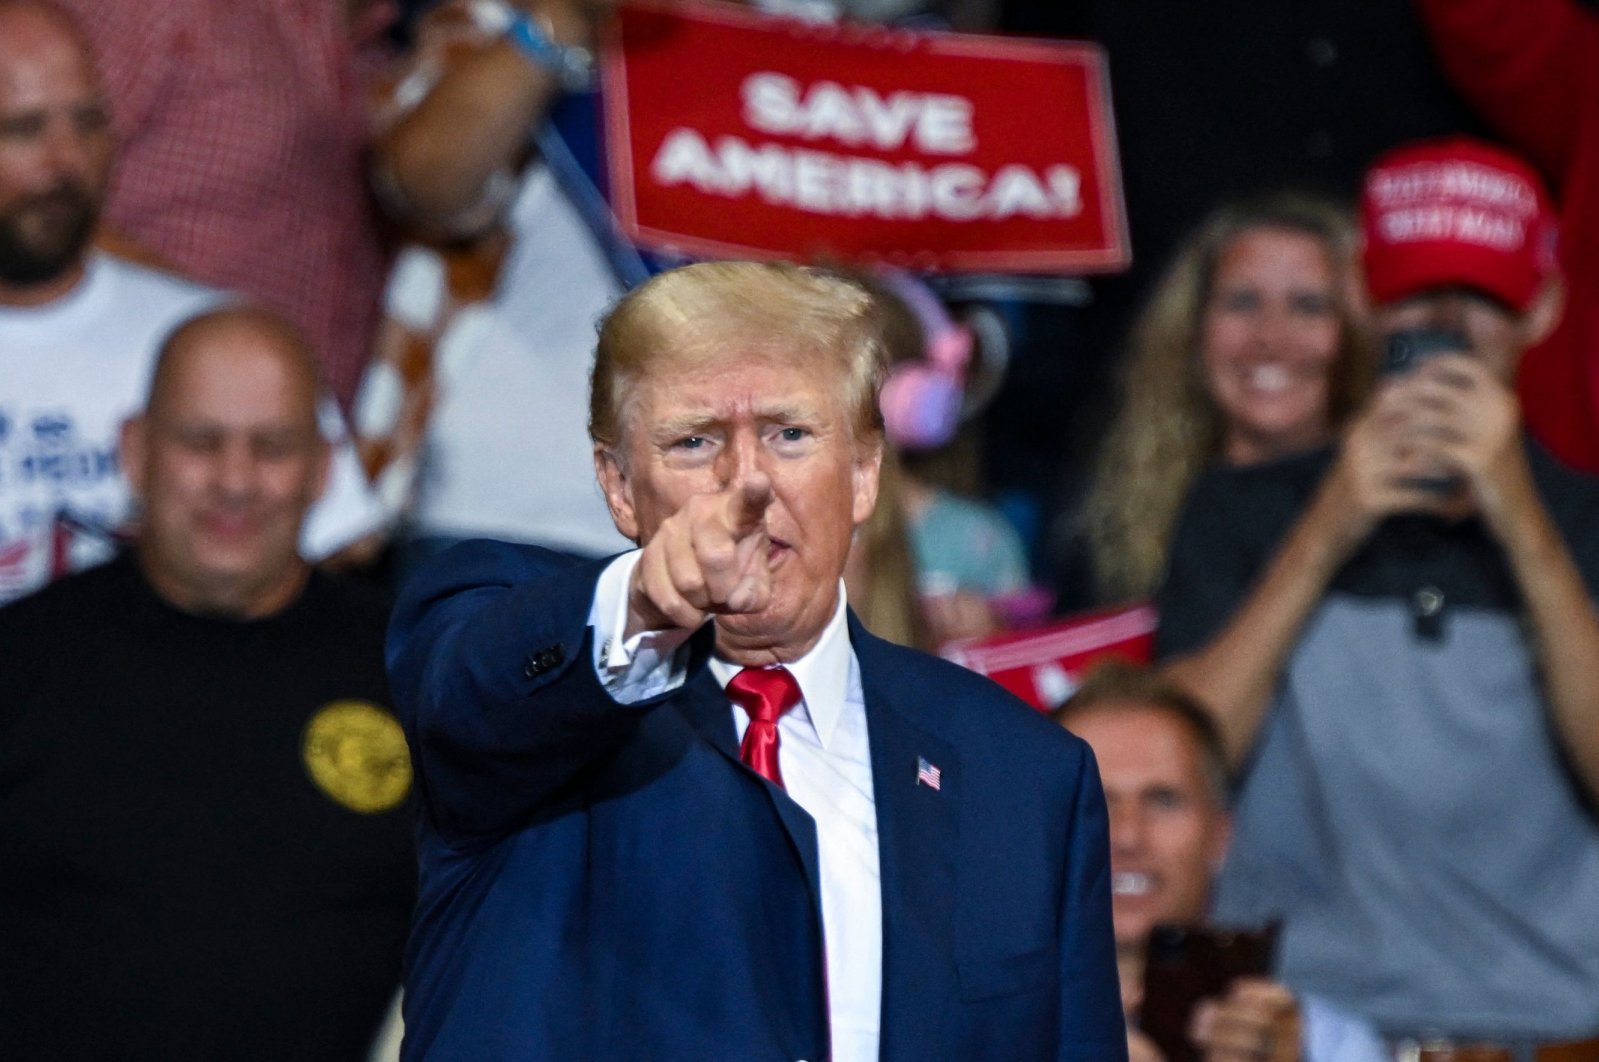 Former U.S. President Donald Trump speaks during a campaign rally in support of Doug Mastriano for Governor of Pennsylvania and Mehmet Öz for US Senate at Mohegan Sun Arena in Wilkes-Barre, Pennsylvania, U.S., Sept. 3, 2022. (AFP Photo)